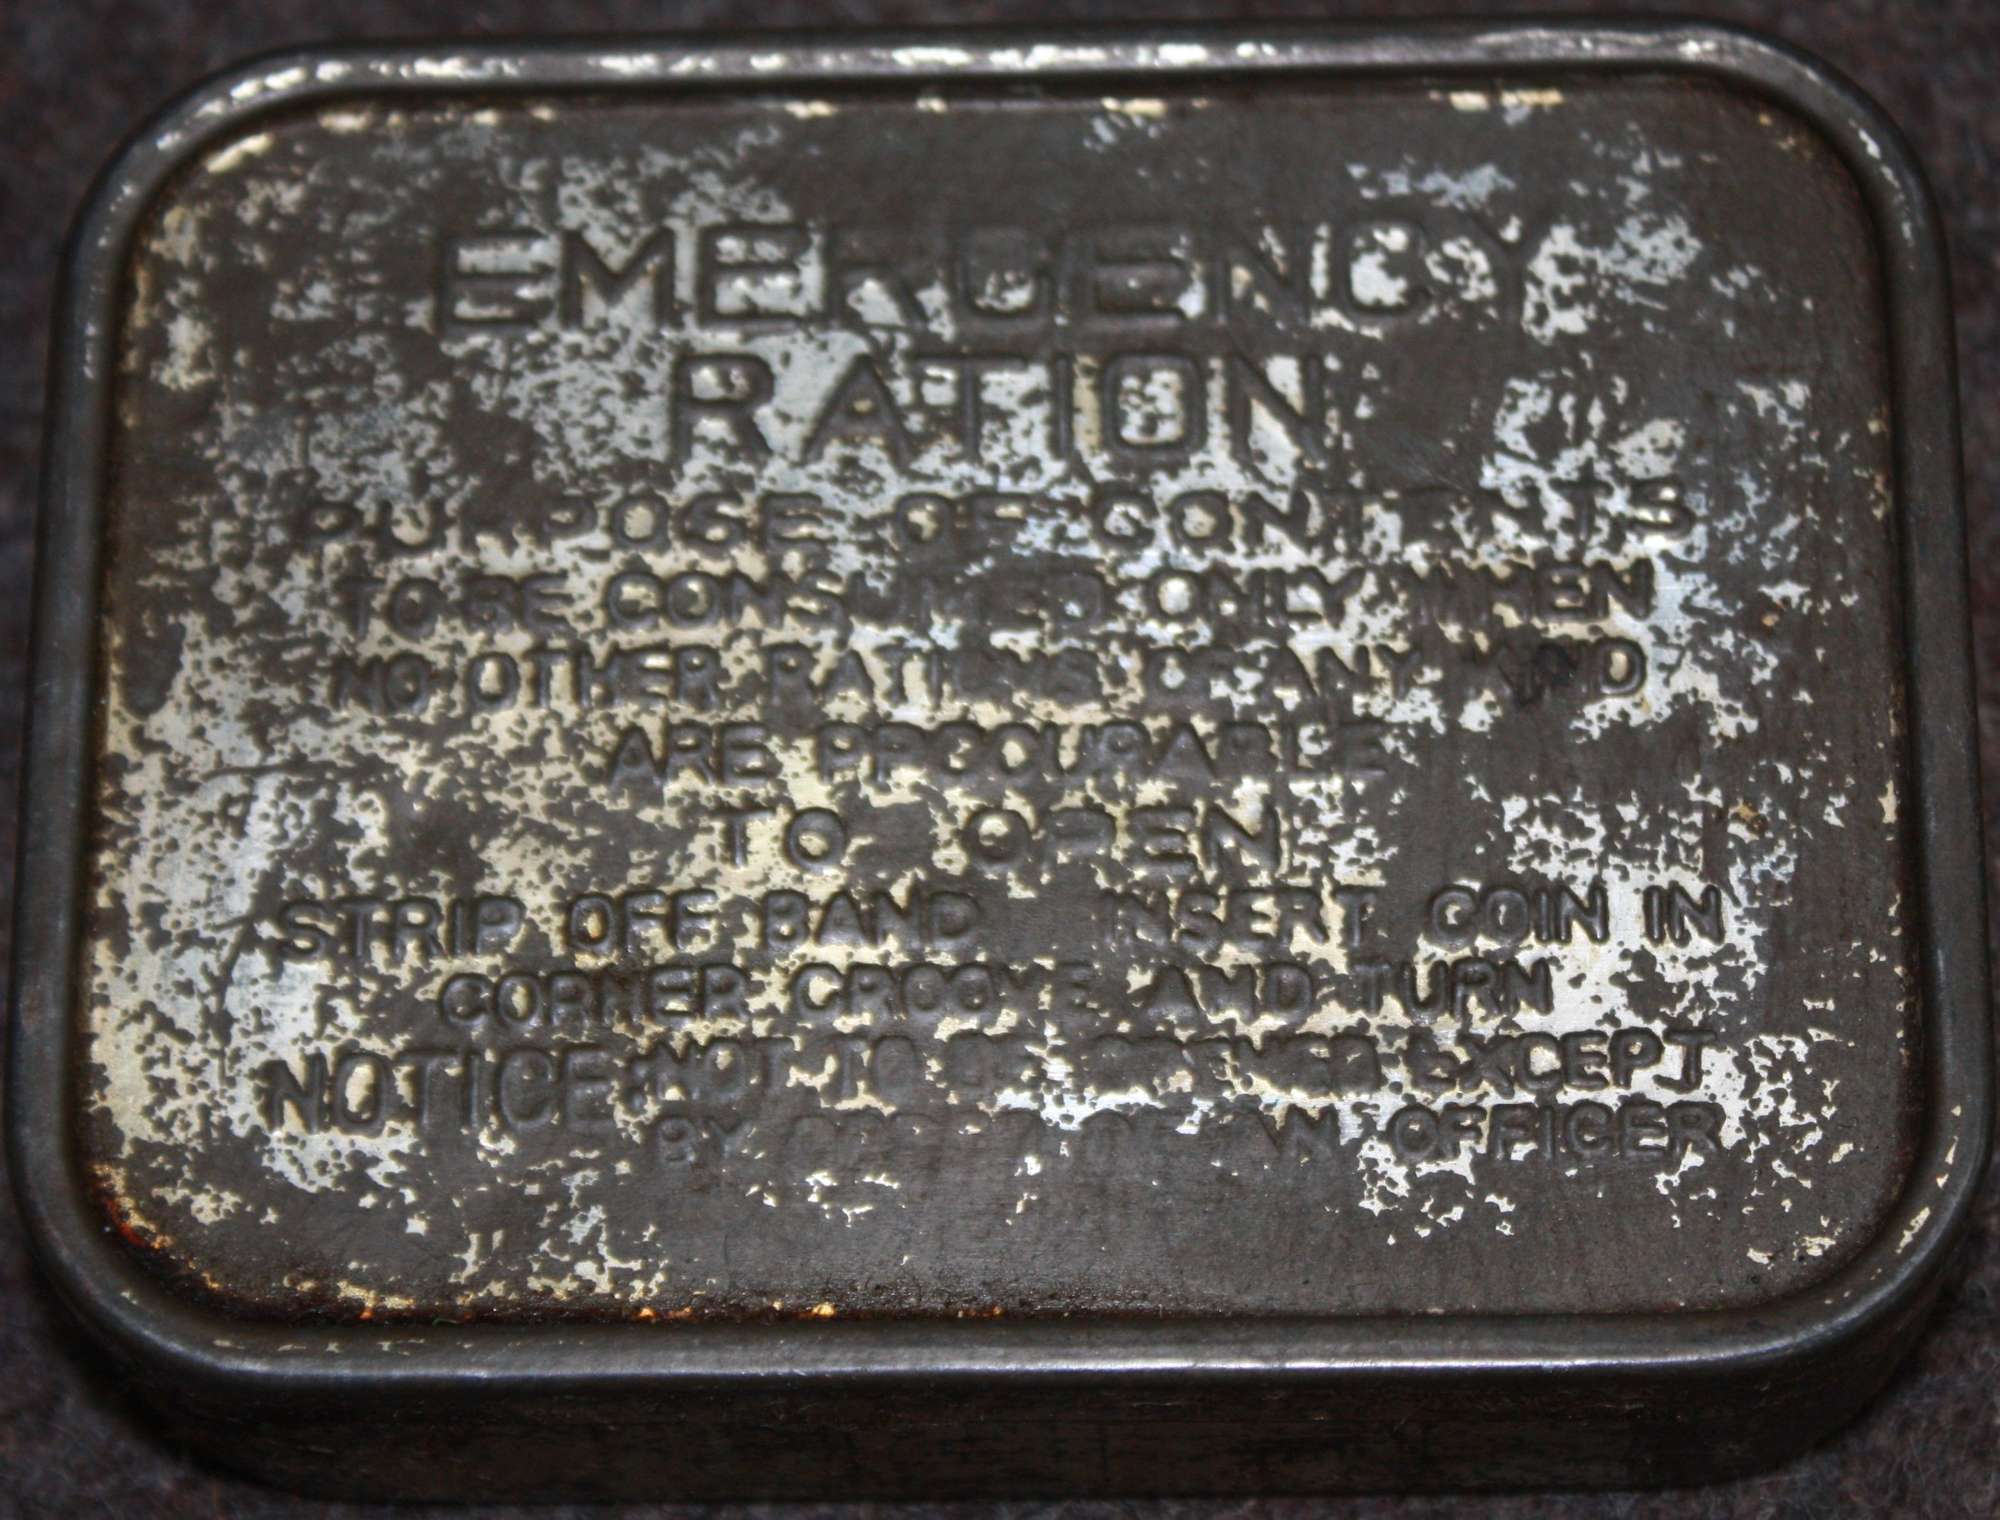 A WELL USED EXAMPLE OF THE WWII EMERGENCY RATION TIN